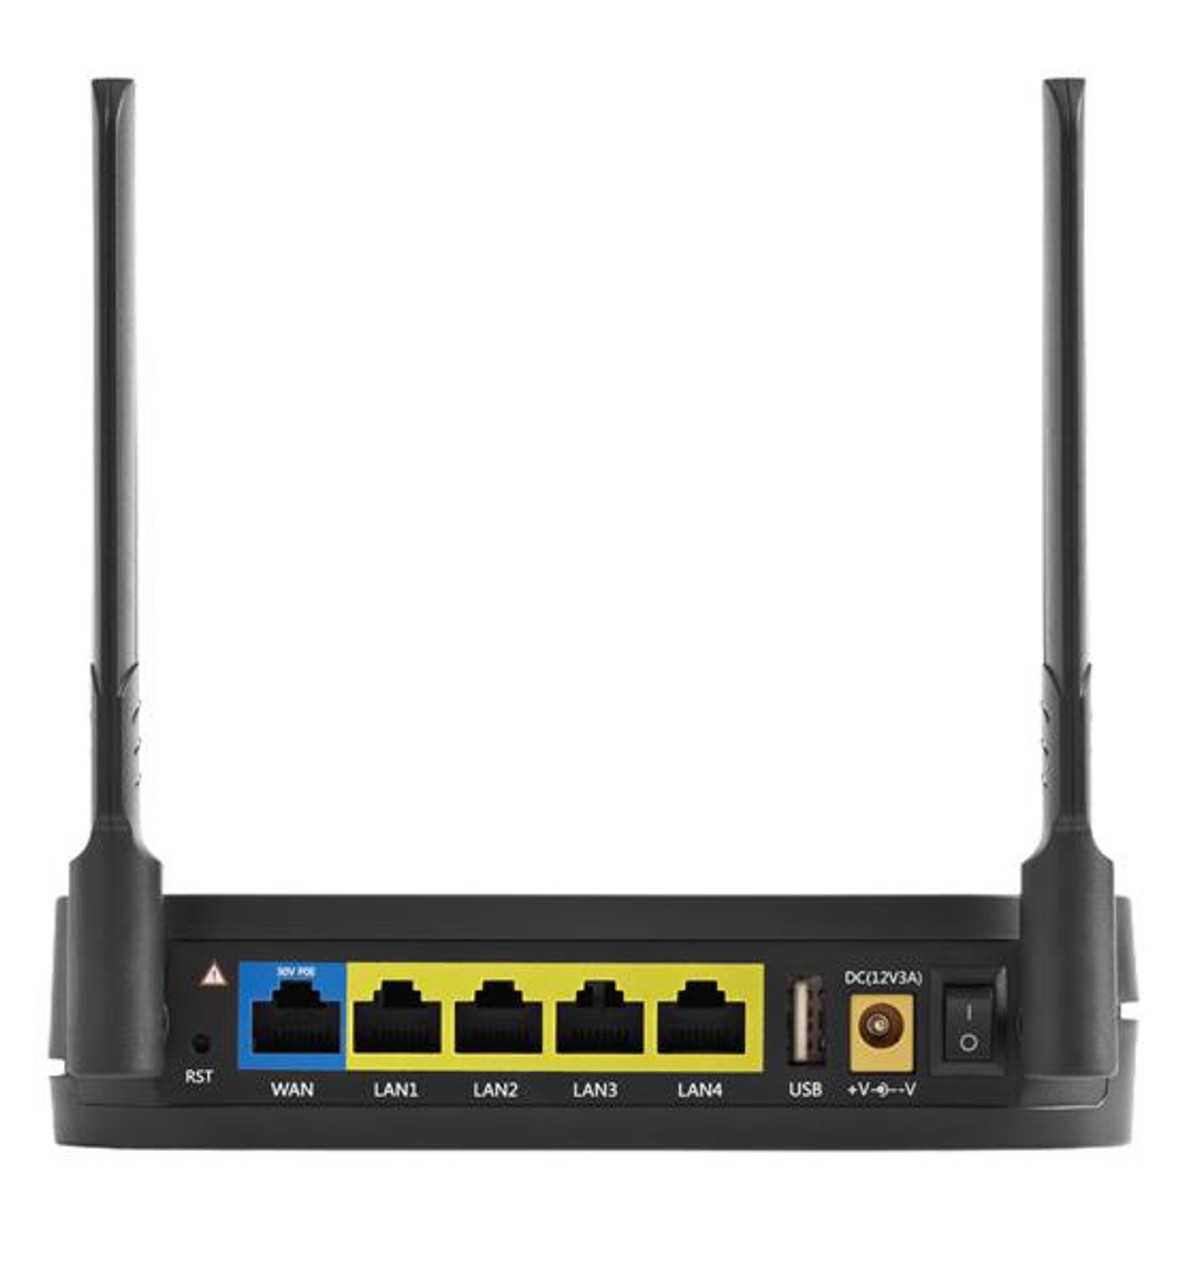 Home R201W 802.11ac Dual Wi-Fi WLAN Router with PoE for PMP450, ePMP SMs, RoW. No power cord - WirelessUnits.com